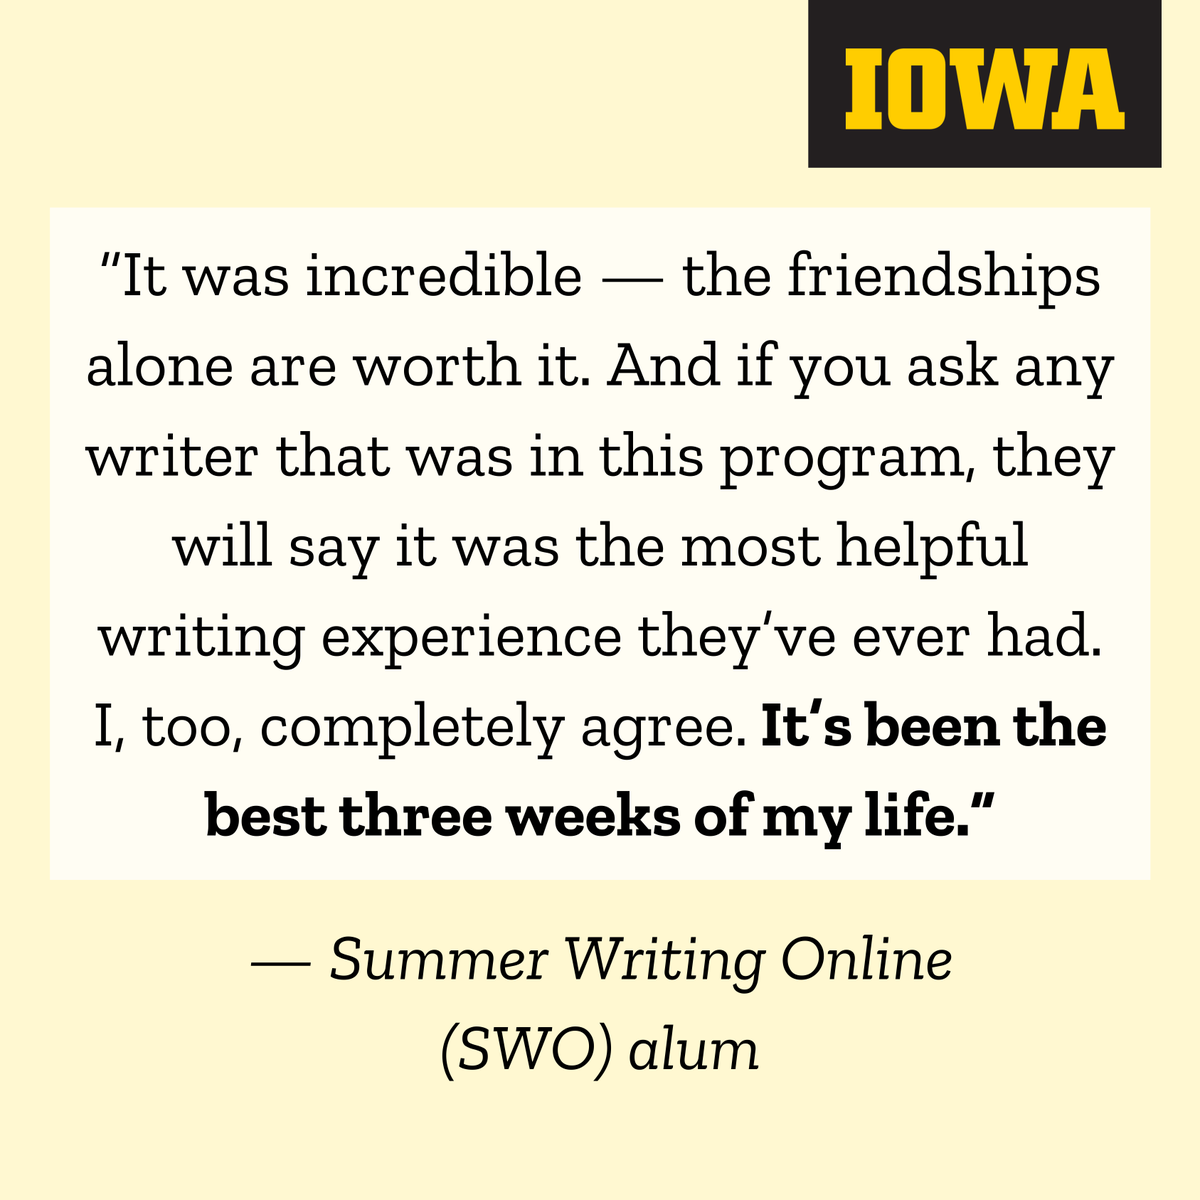 We think that Summer Writing Online (SWO) is an amazing program, but you don't just have to take our word for it! Visit belinblank.org/swo/ to learn more and apply.